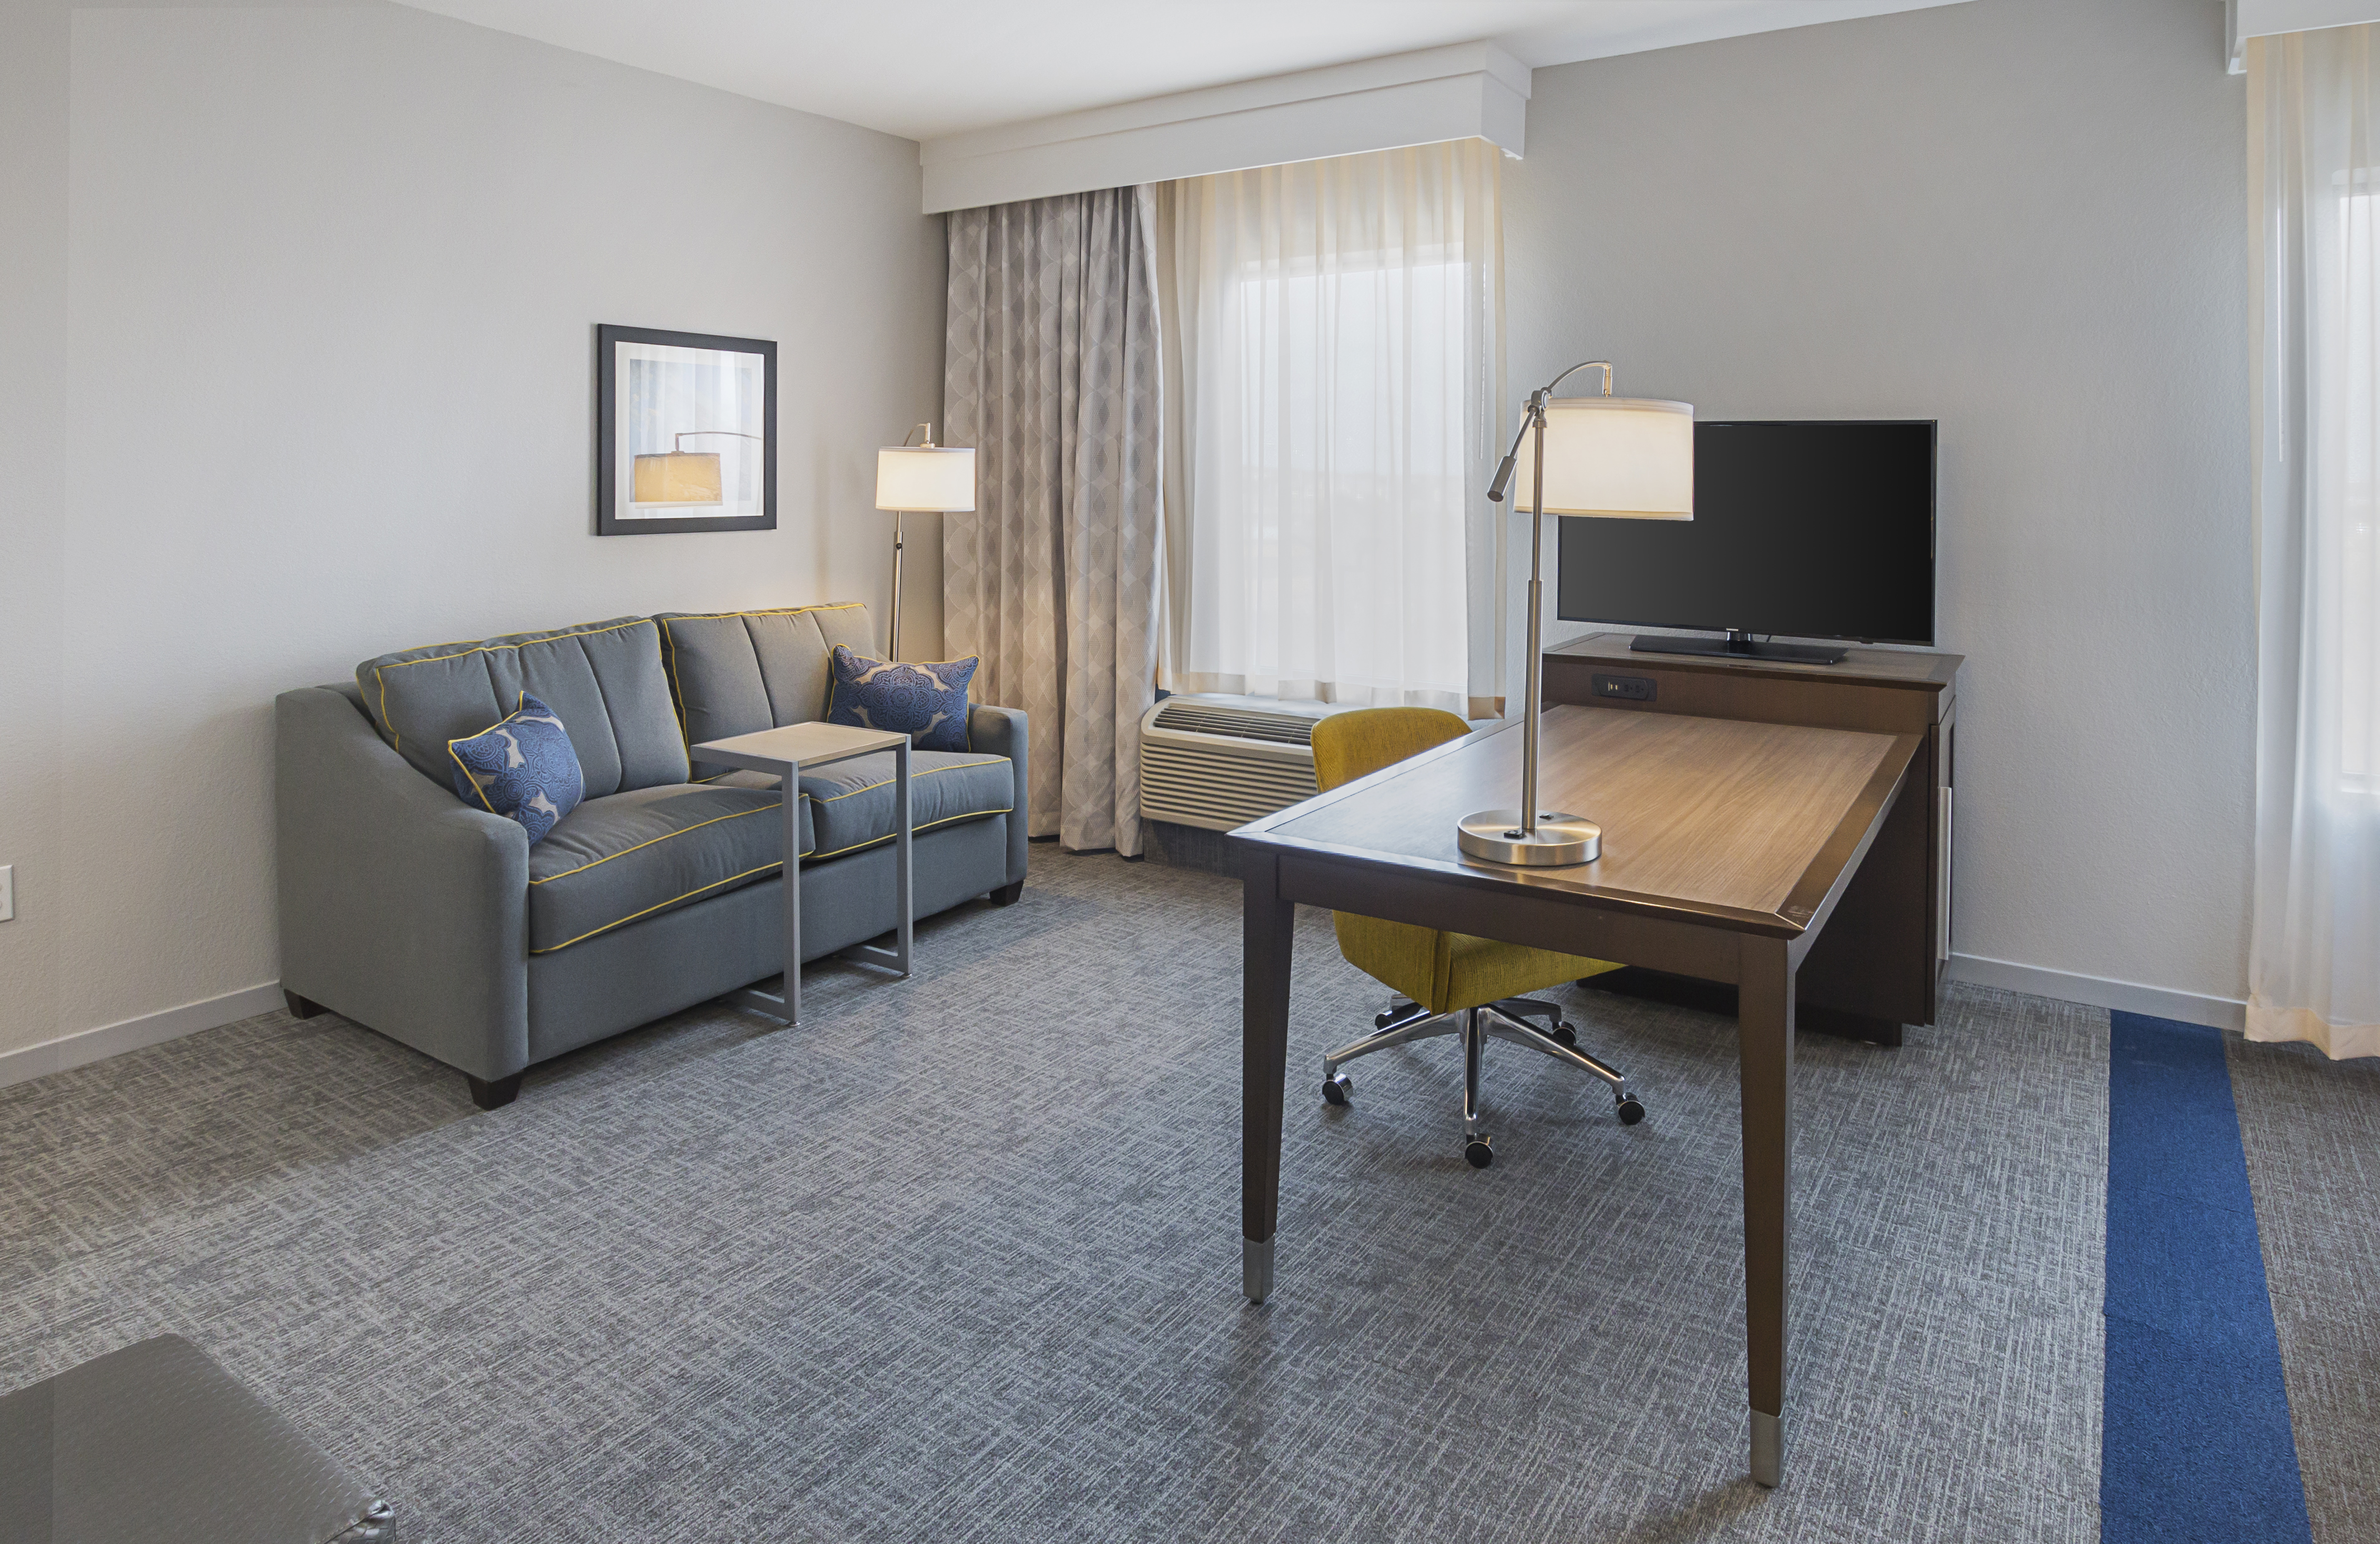 DFW hotel suite sofa bed, desk, desk
  chair, two lamps, and flat screen TV